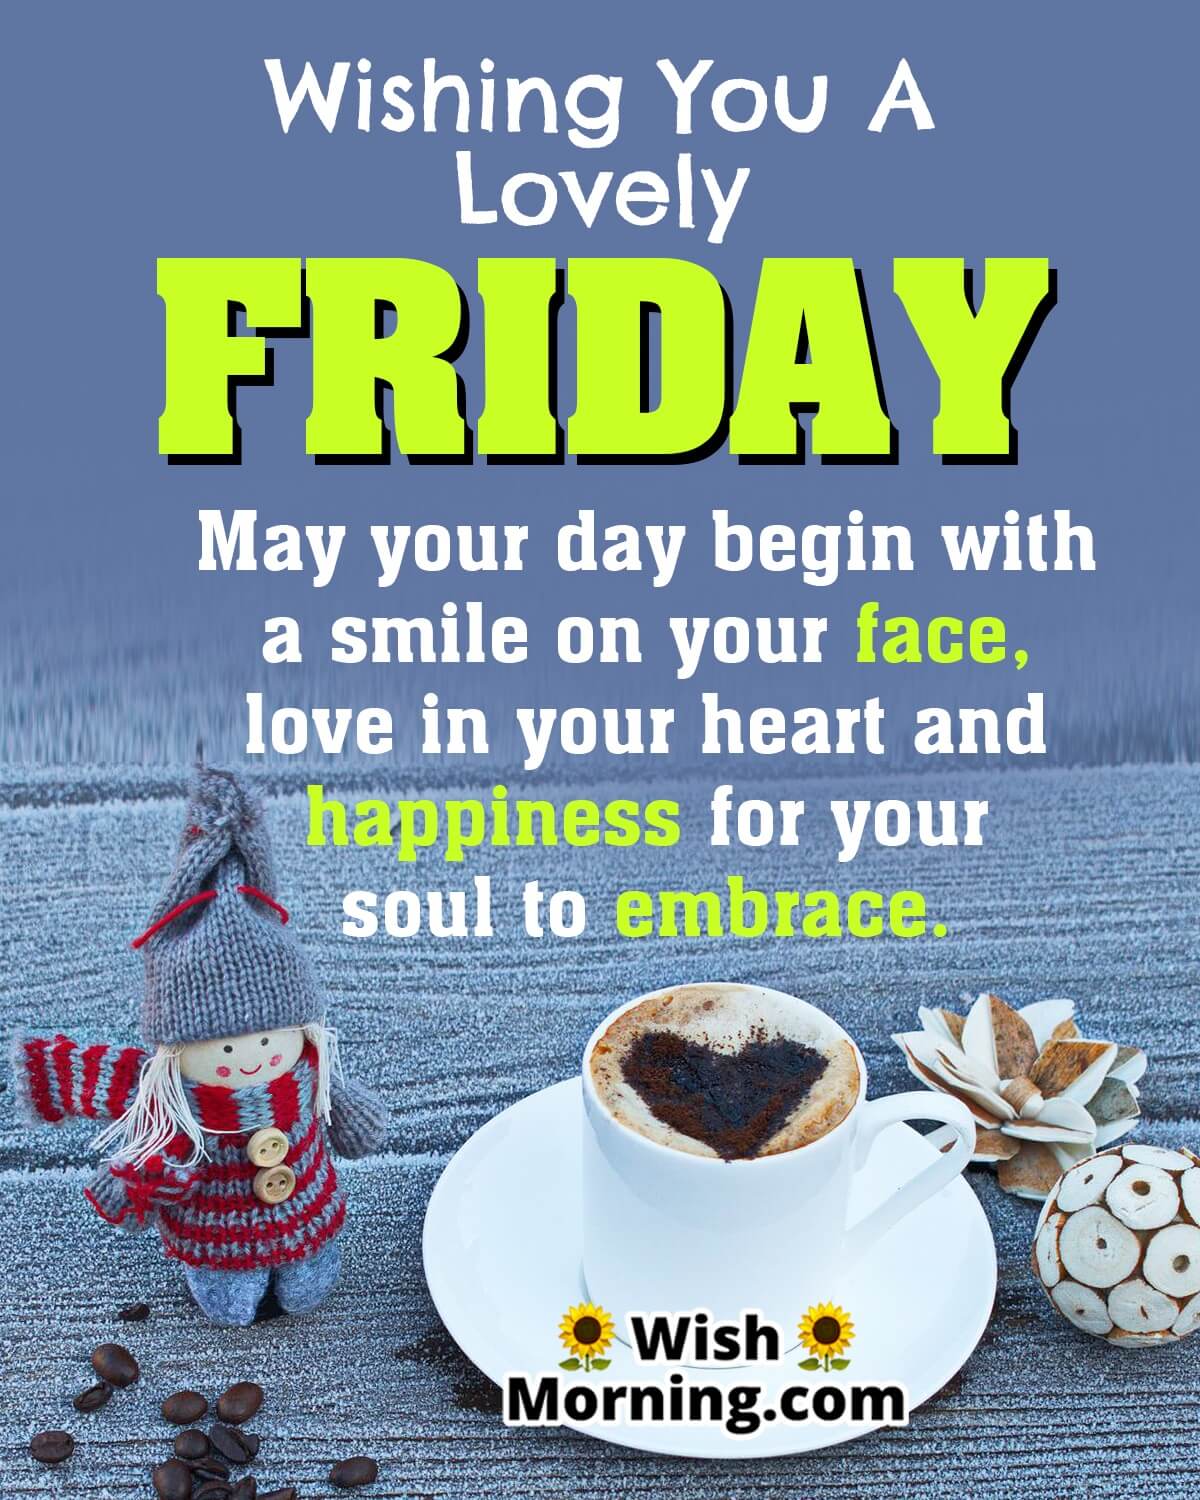 Wishing You A Lovely Friday